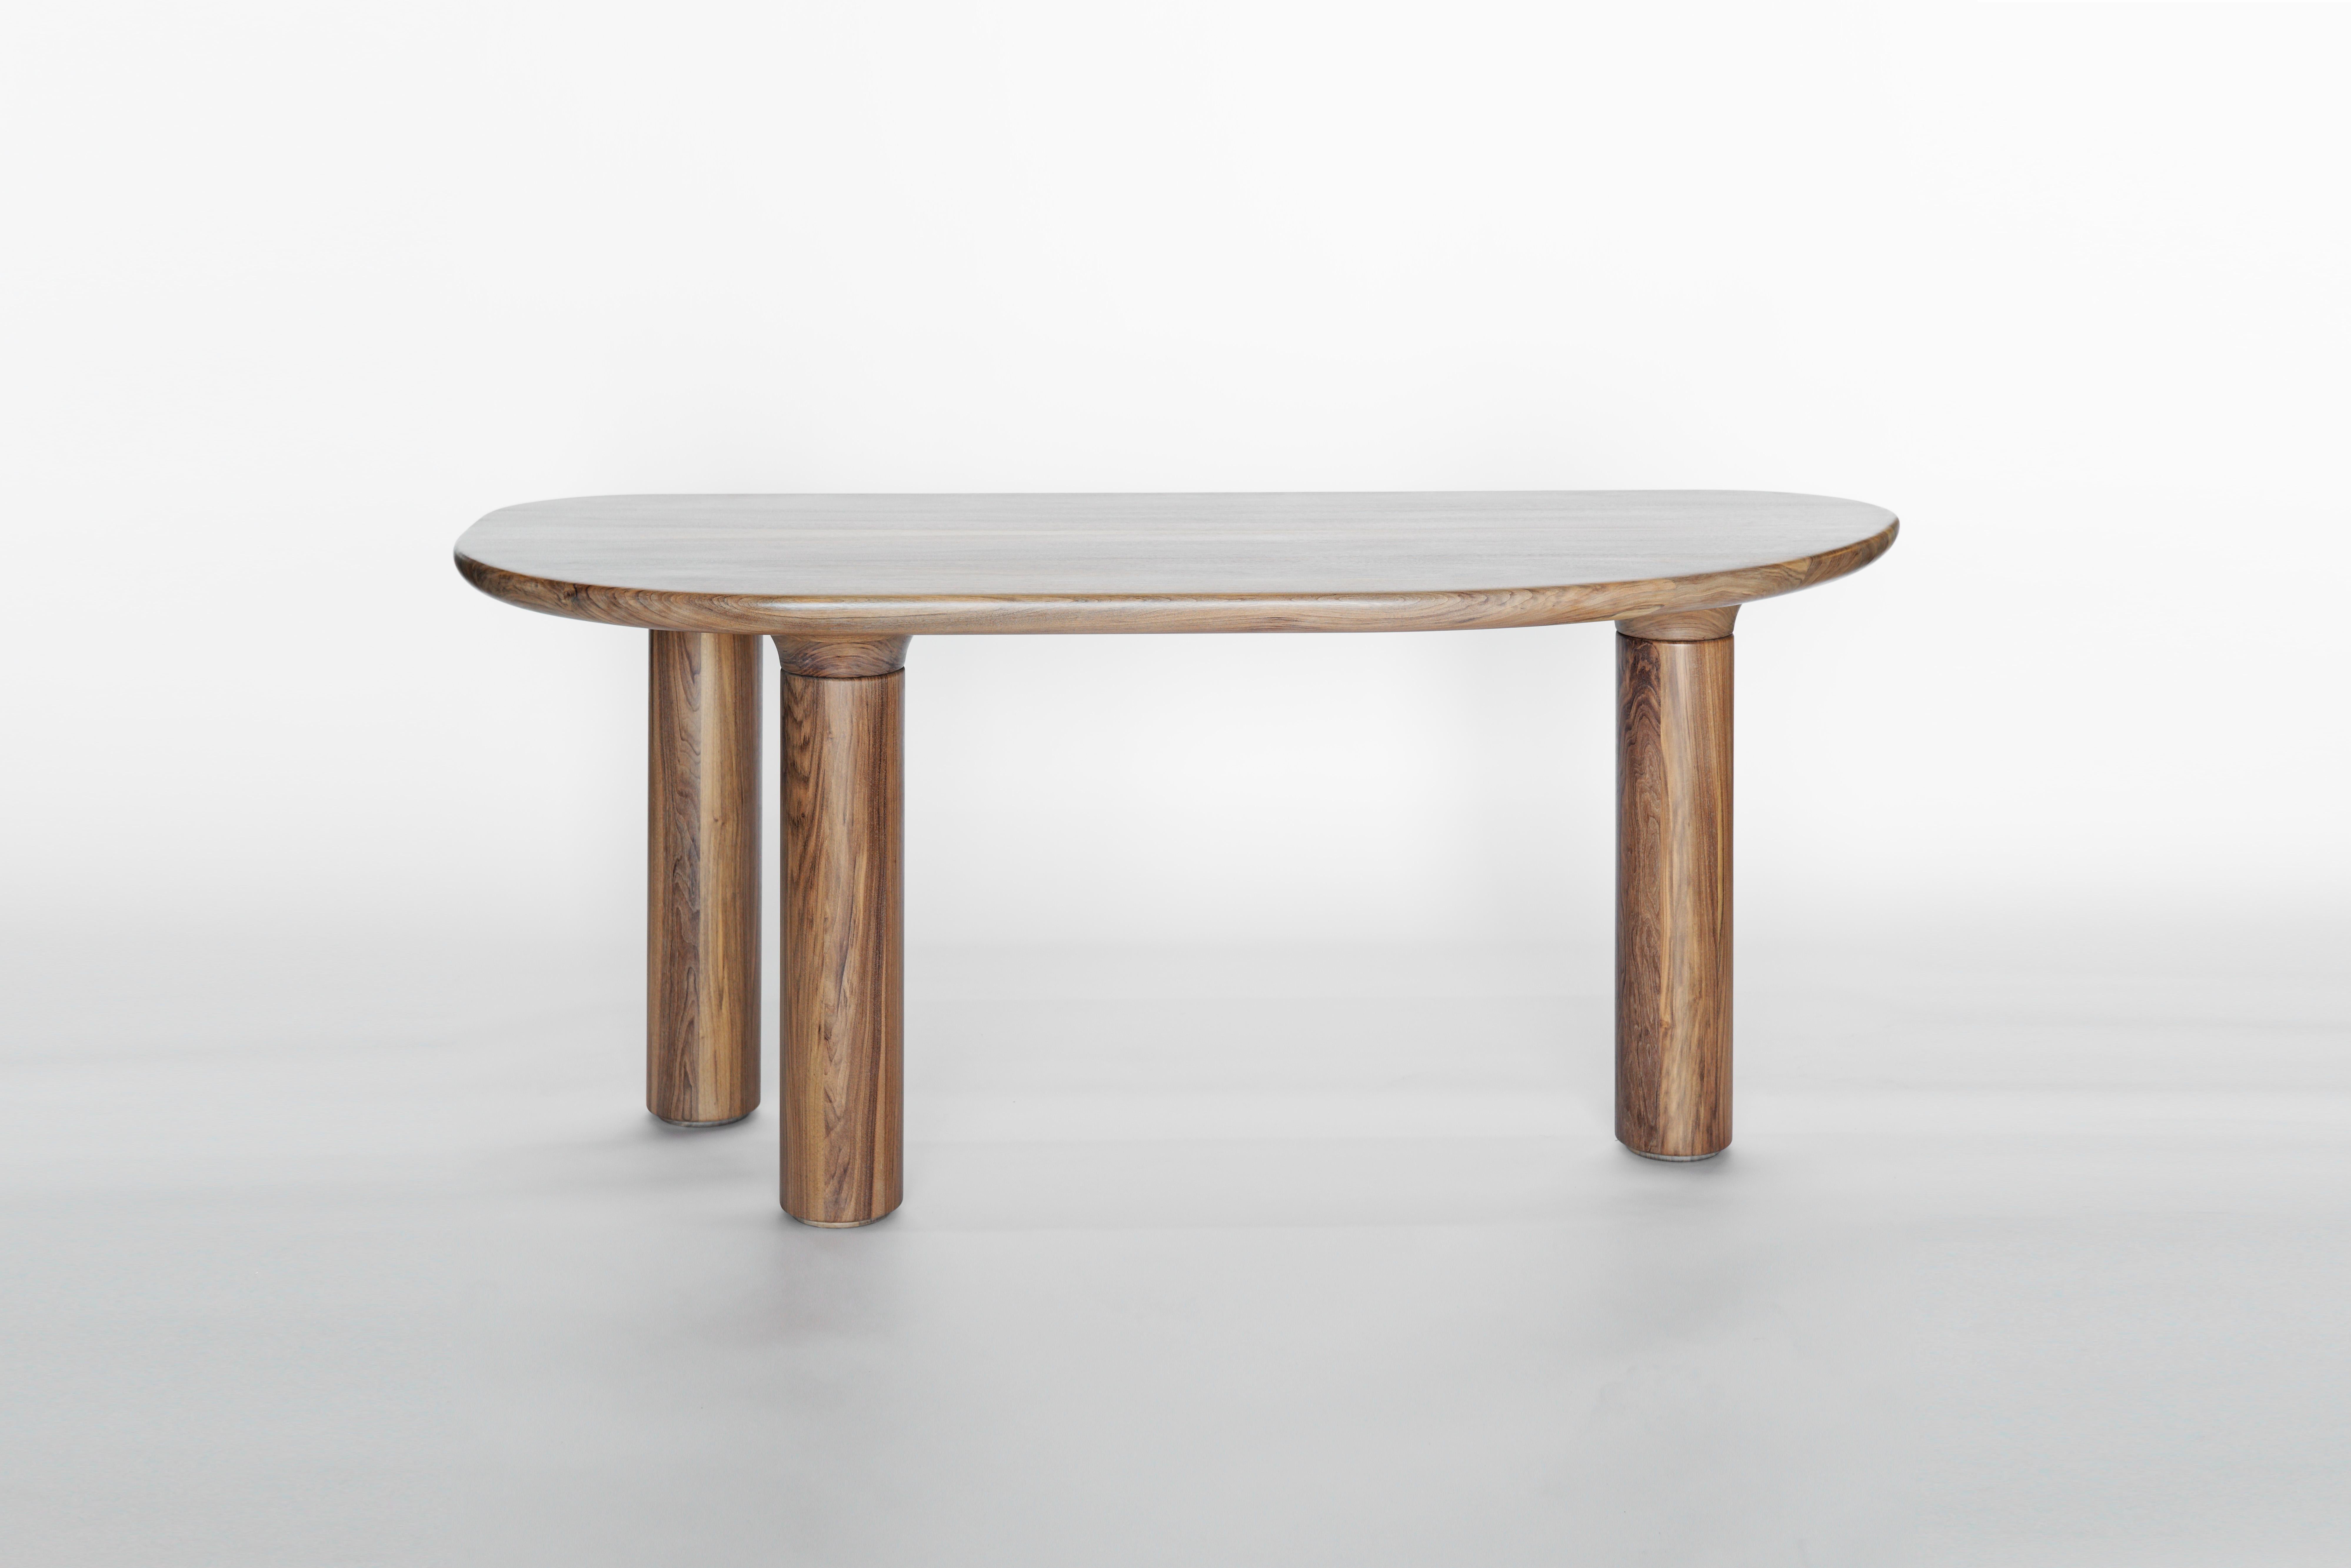 Victoria Magniant wanted to go towards the exception by collaborating with a French cabinetmaker recognized for his sense of detail and his unique expertise in the work of noble materials. This table can be made to your dimensions up to 4.20m